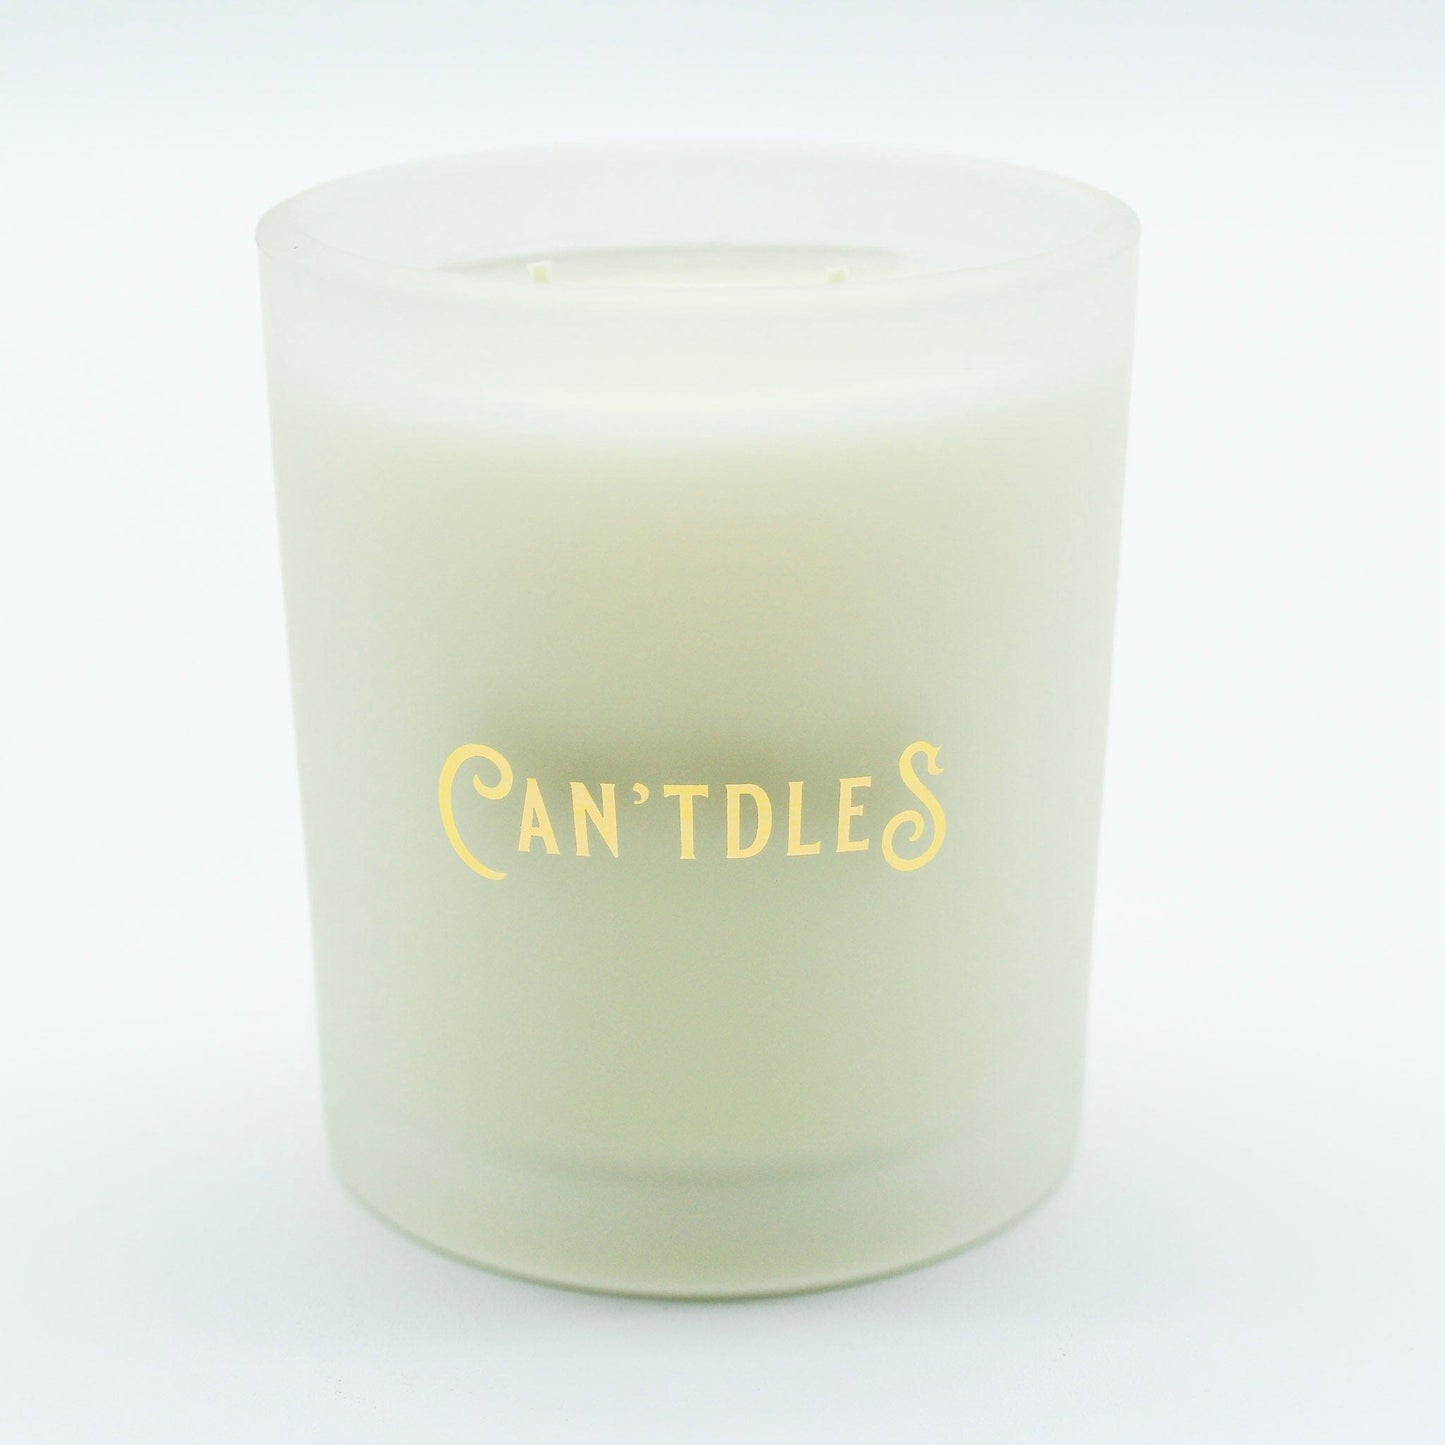 Can'tdles Candles The Speakeasy: Pink Pepper, Rum & Neroli